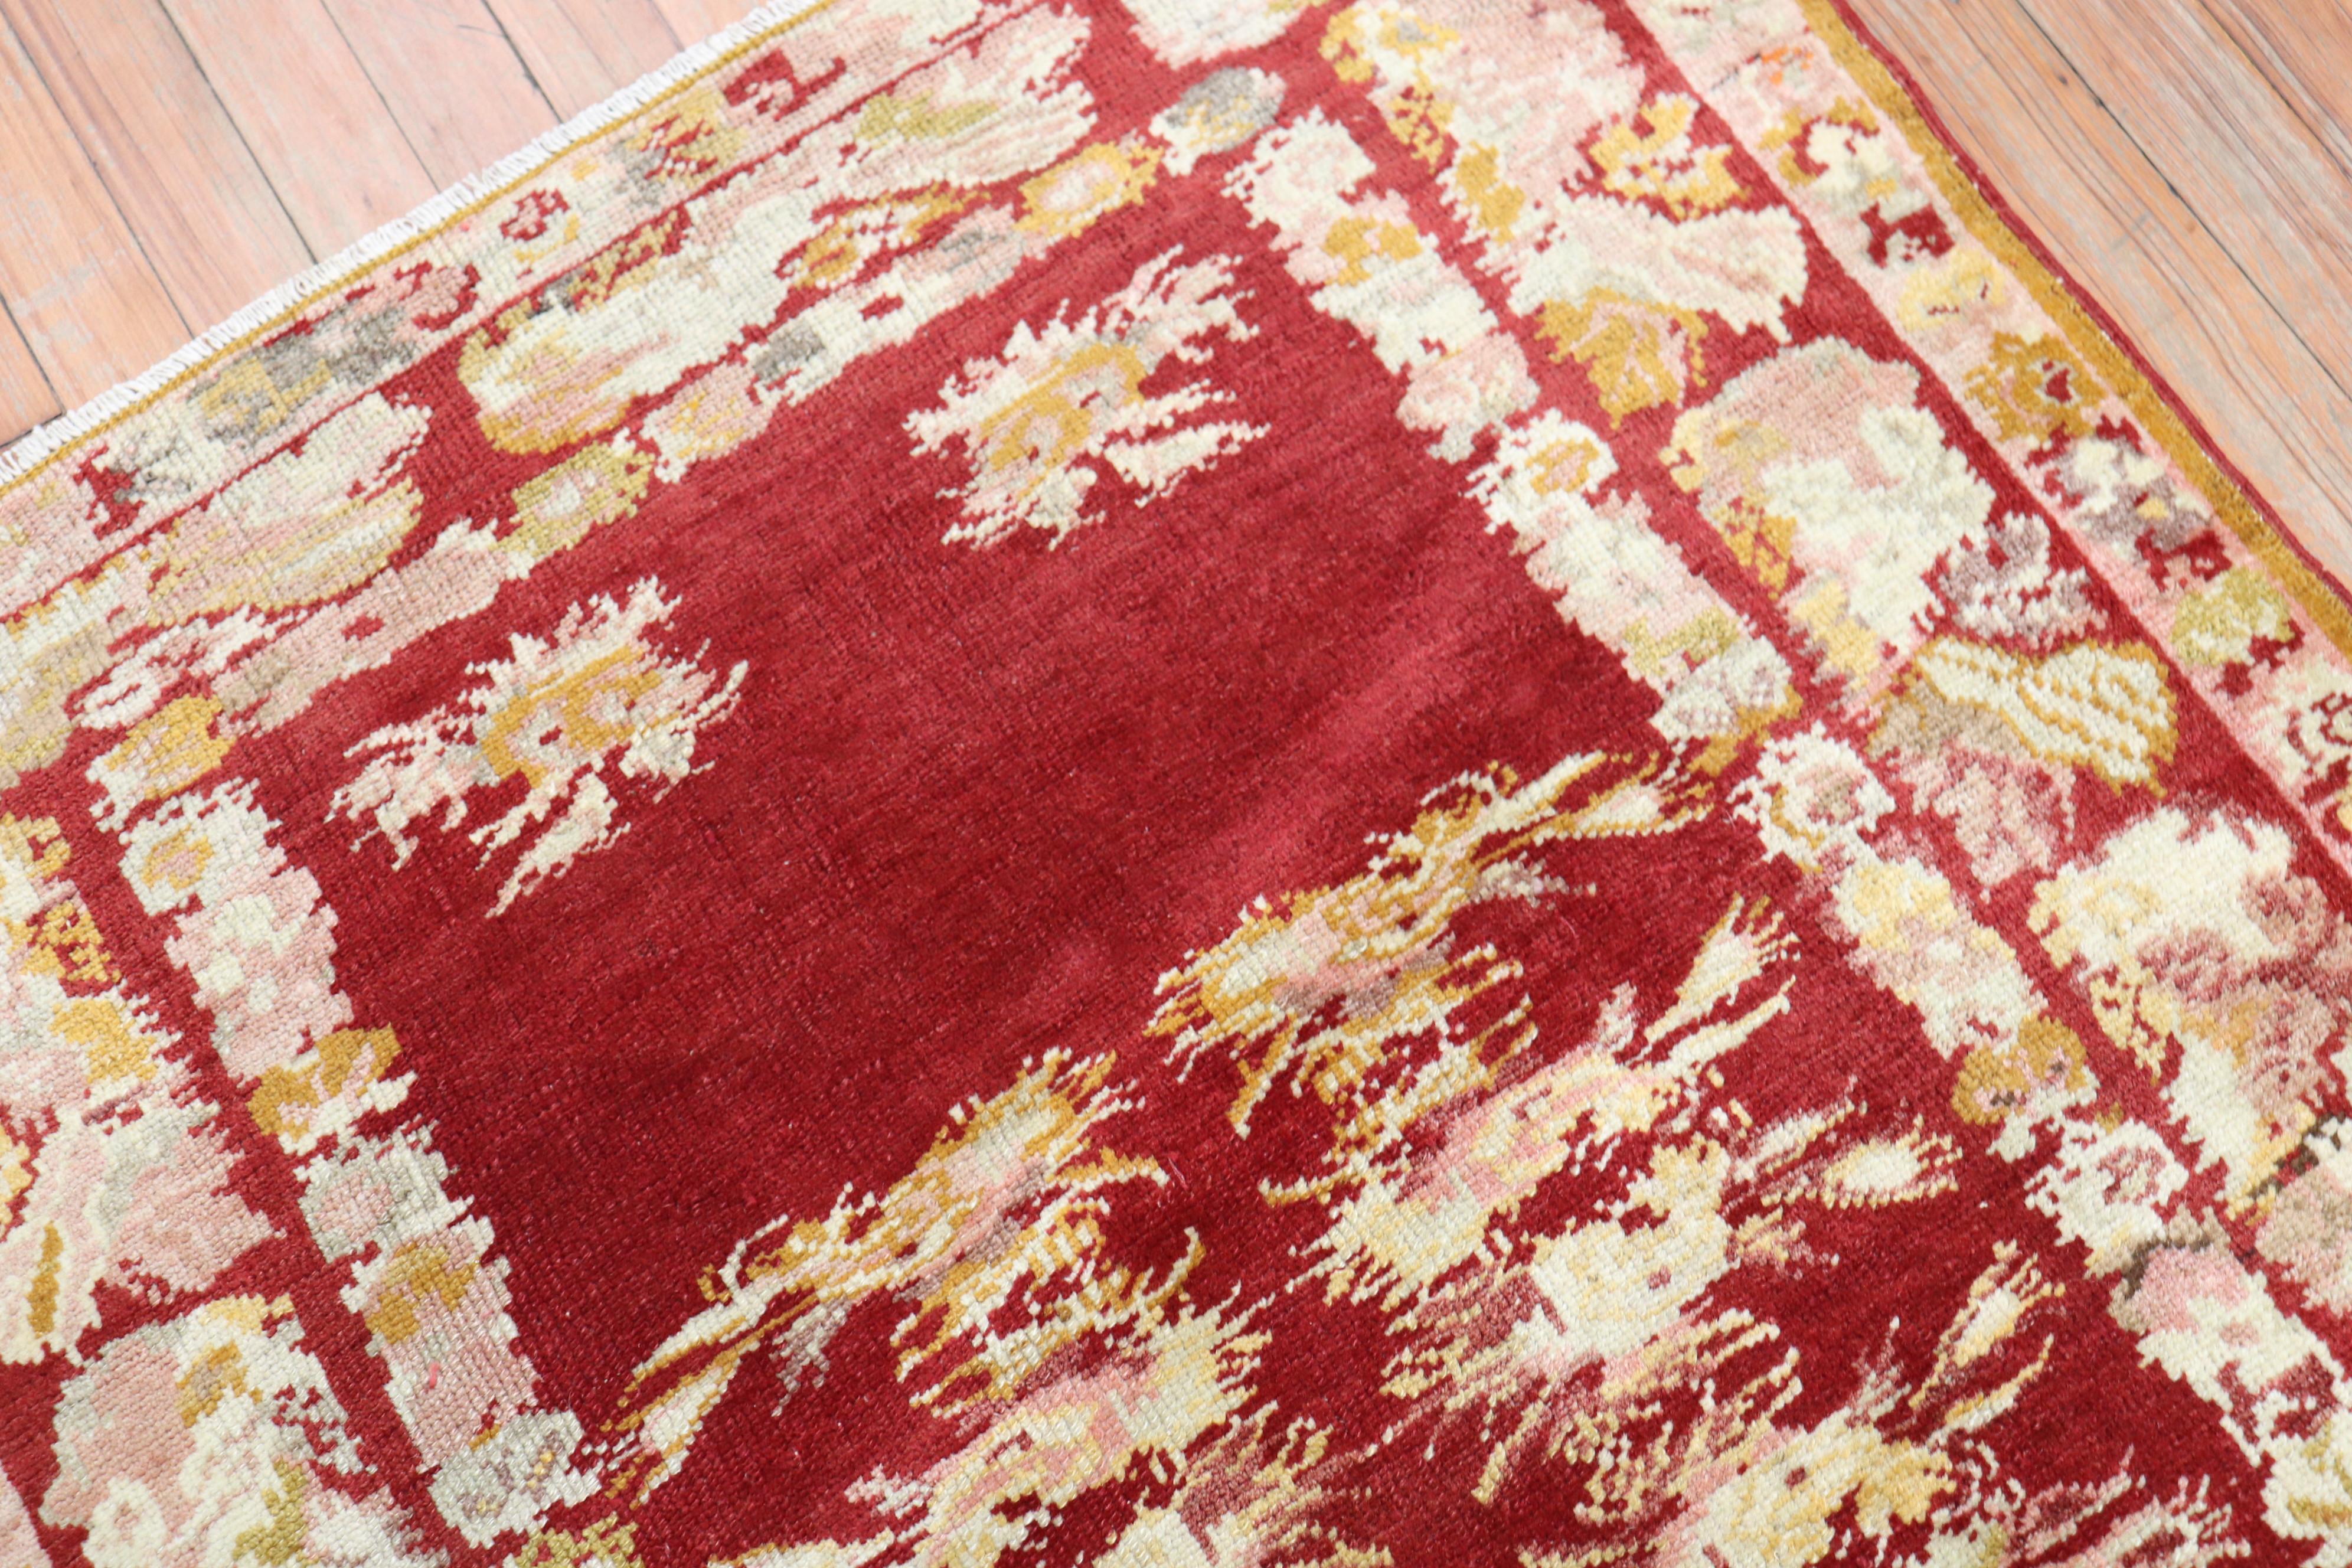 Cherry Red Antique Turkish Melas Rug, Early 20th Century For Sale 3